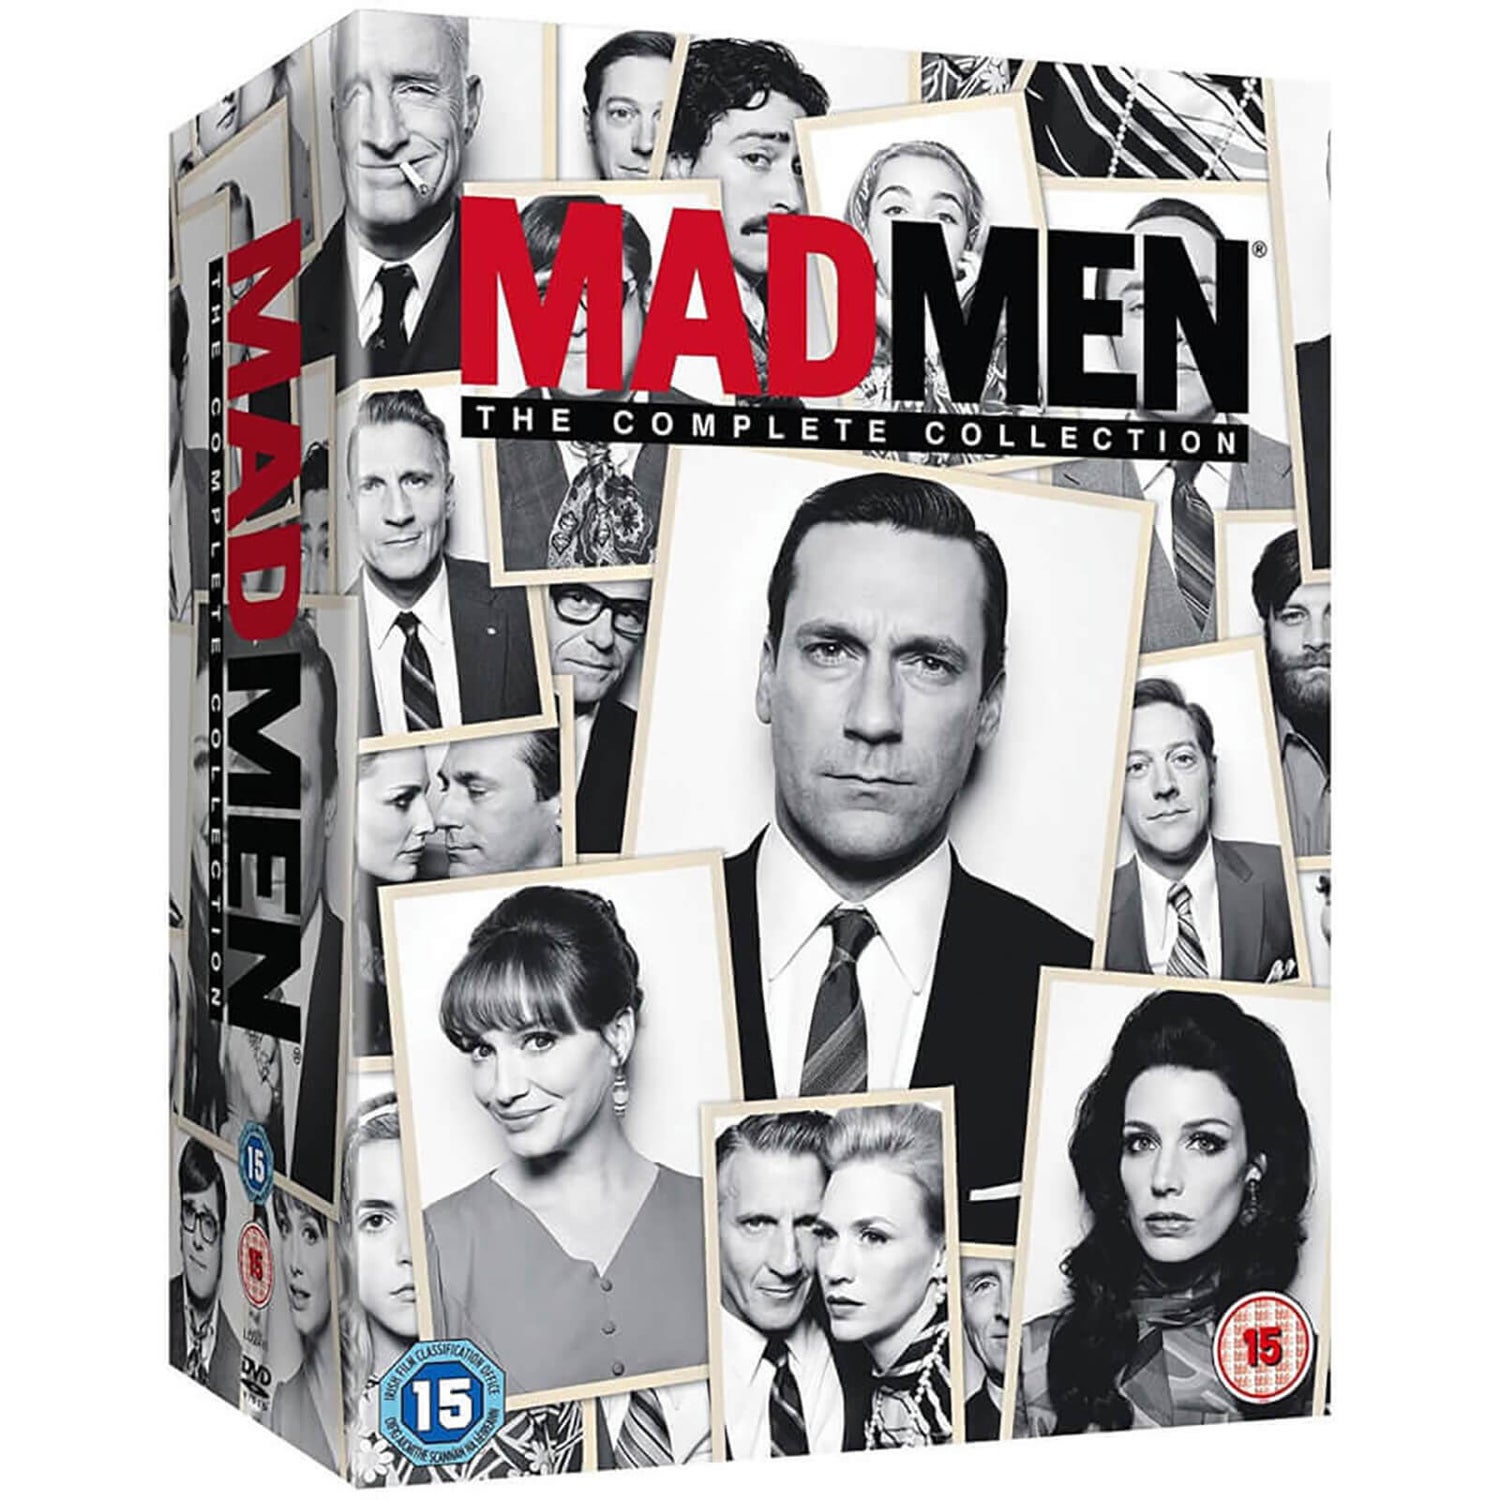 Mad Men - Collection complète (Re-Sleeve)